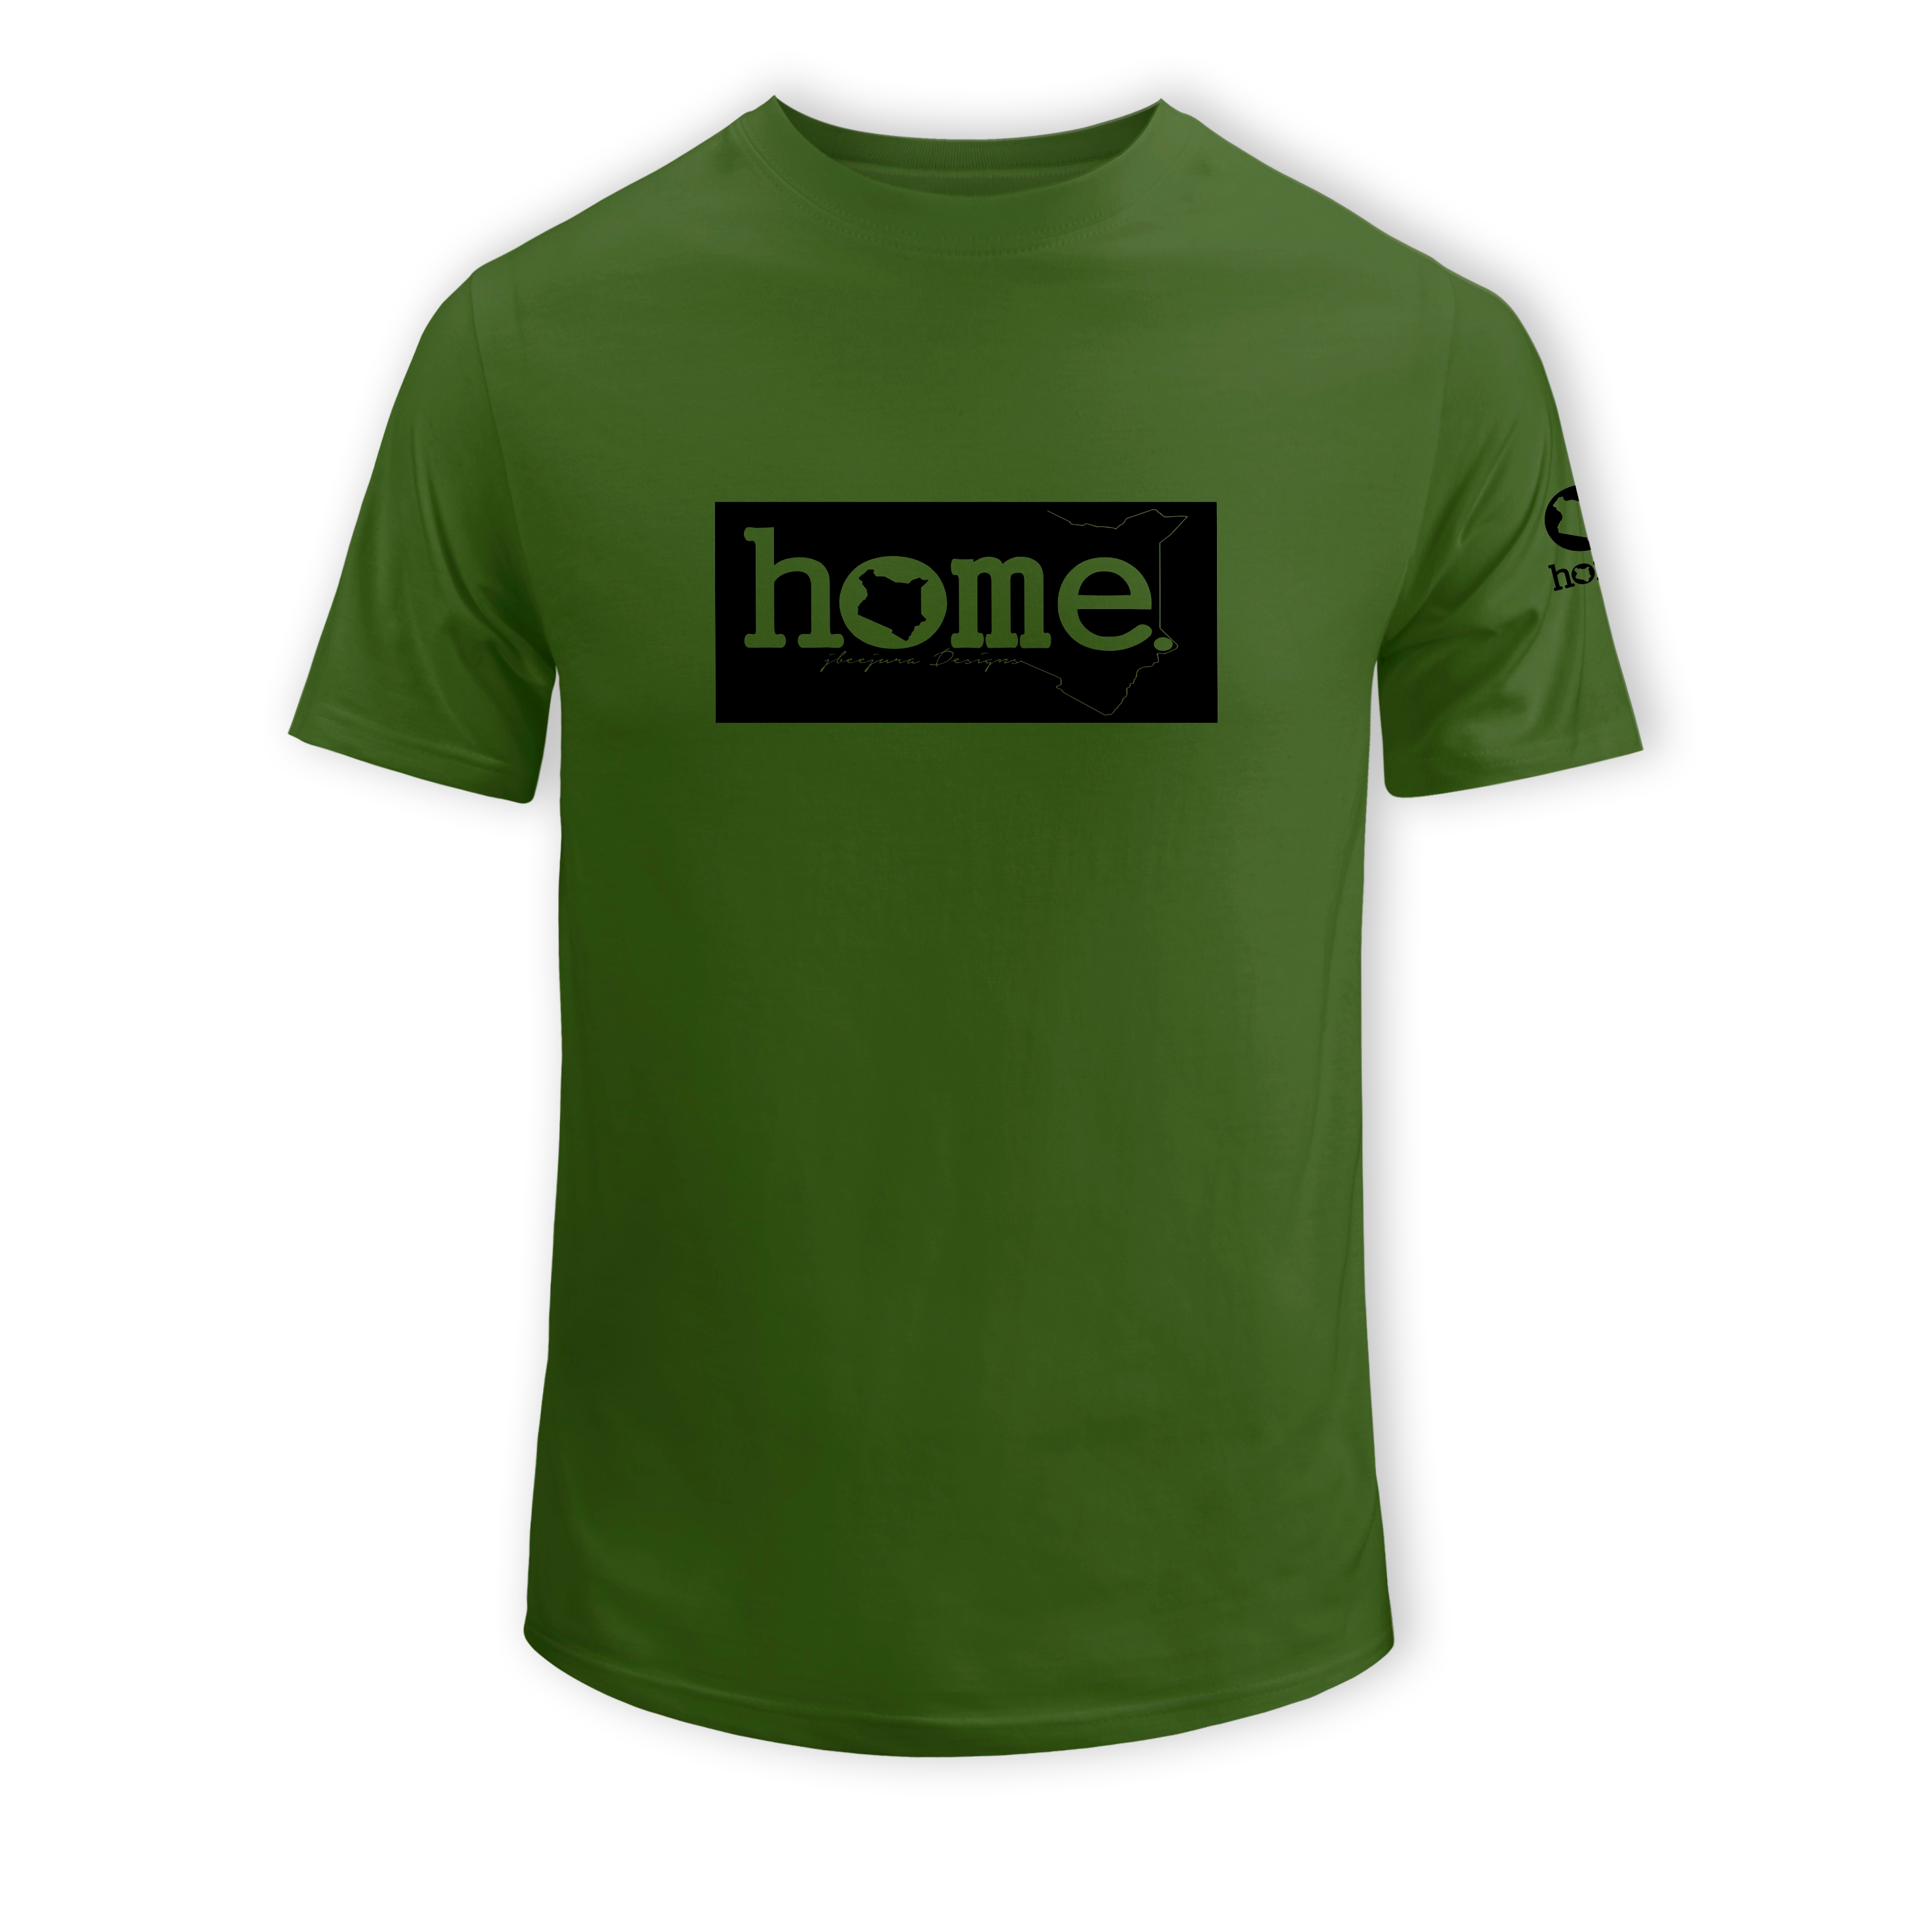 home_254 SHORT-SLEEVED JUNGLE GREEN T-SHIRT WITH A BLACK CLASSIC PRINT – COTTON PLUS FABRIC